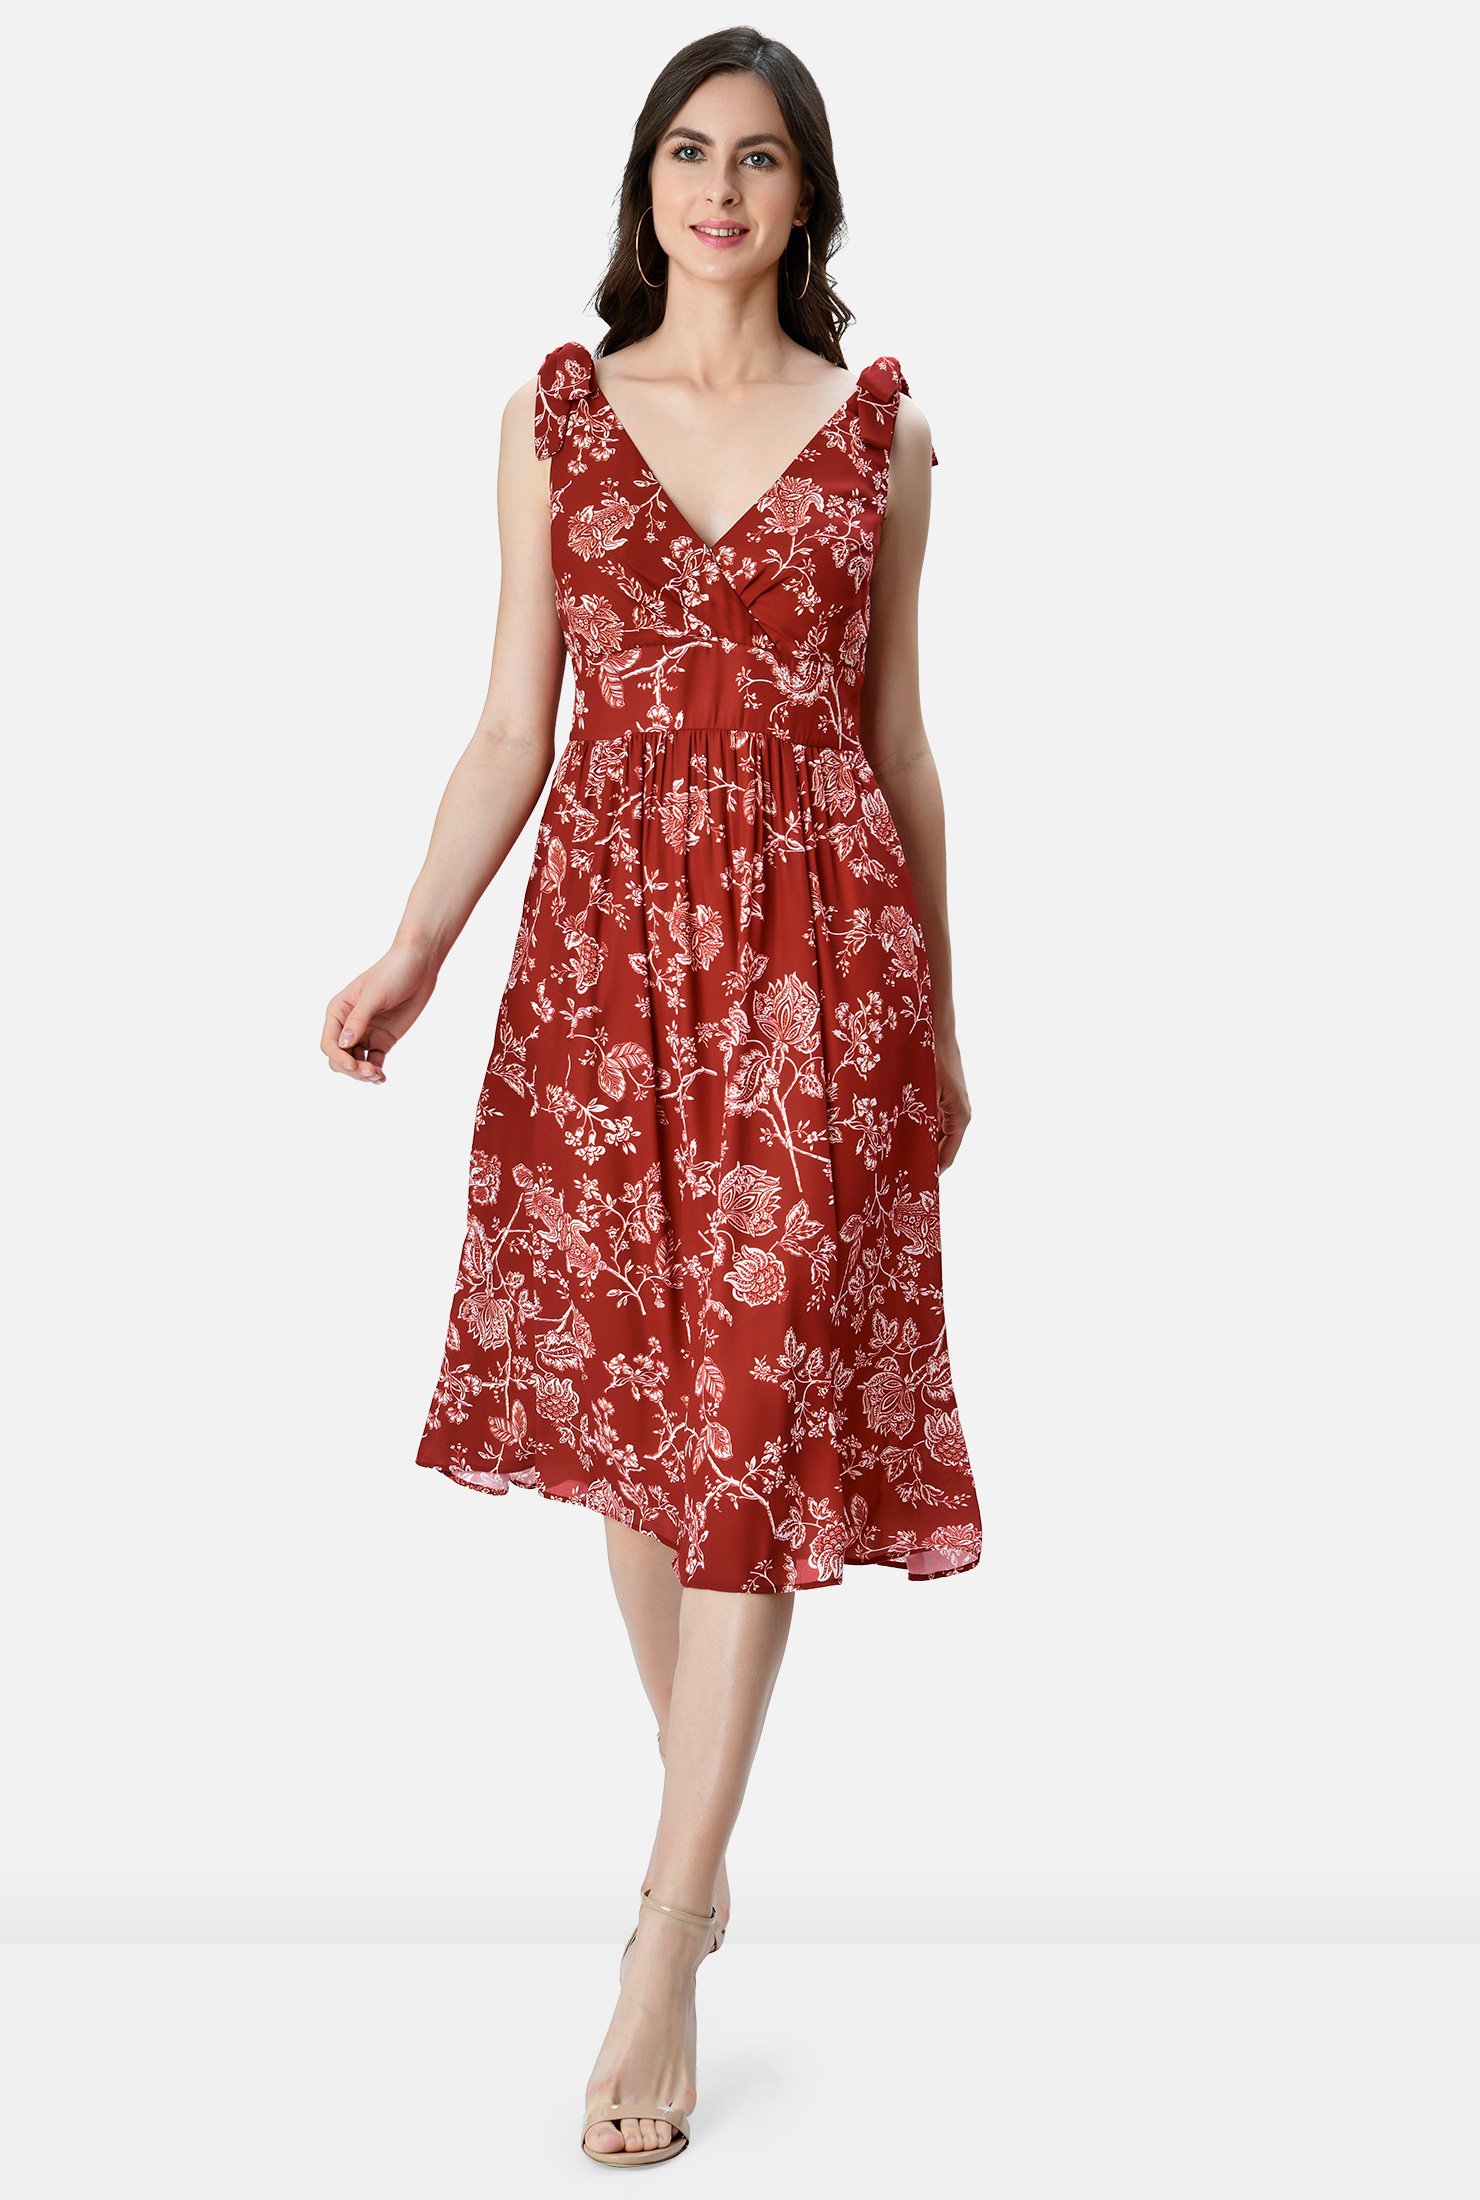 Our floral print crepe dress is designed to flatter and enhance with an angled pleat surplice bodice, banded empire waist and ruched pleat full skirt.